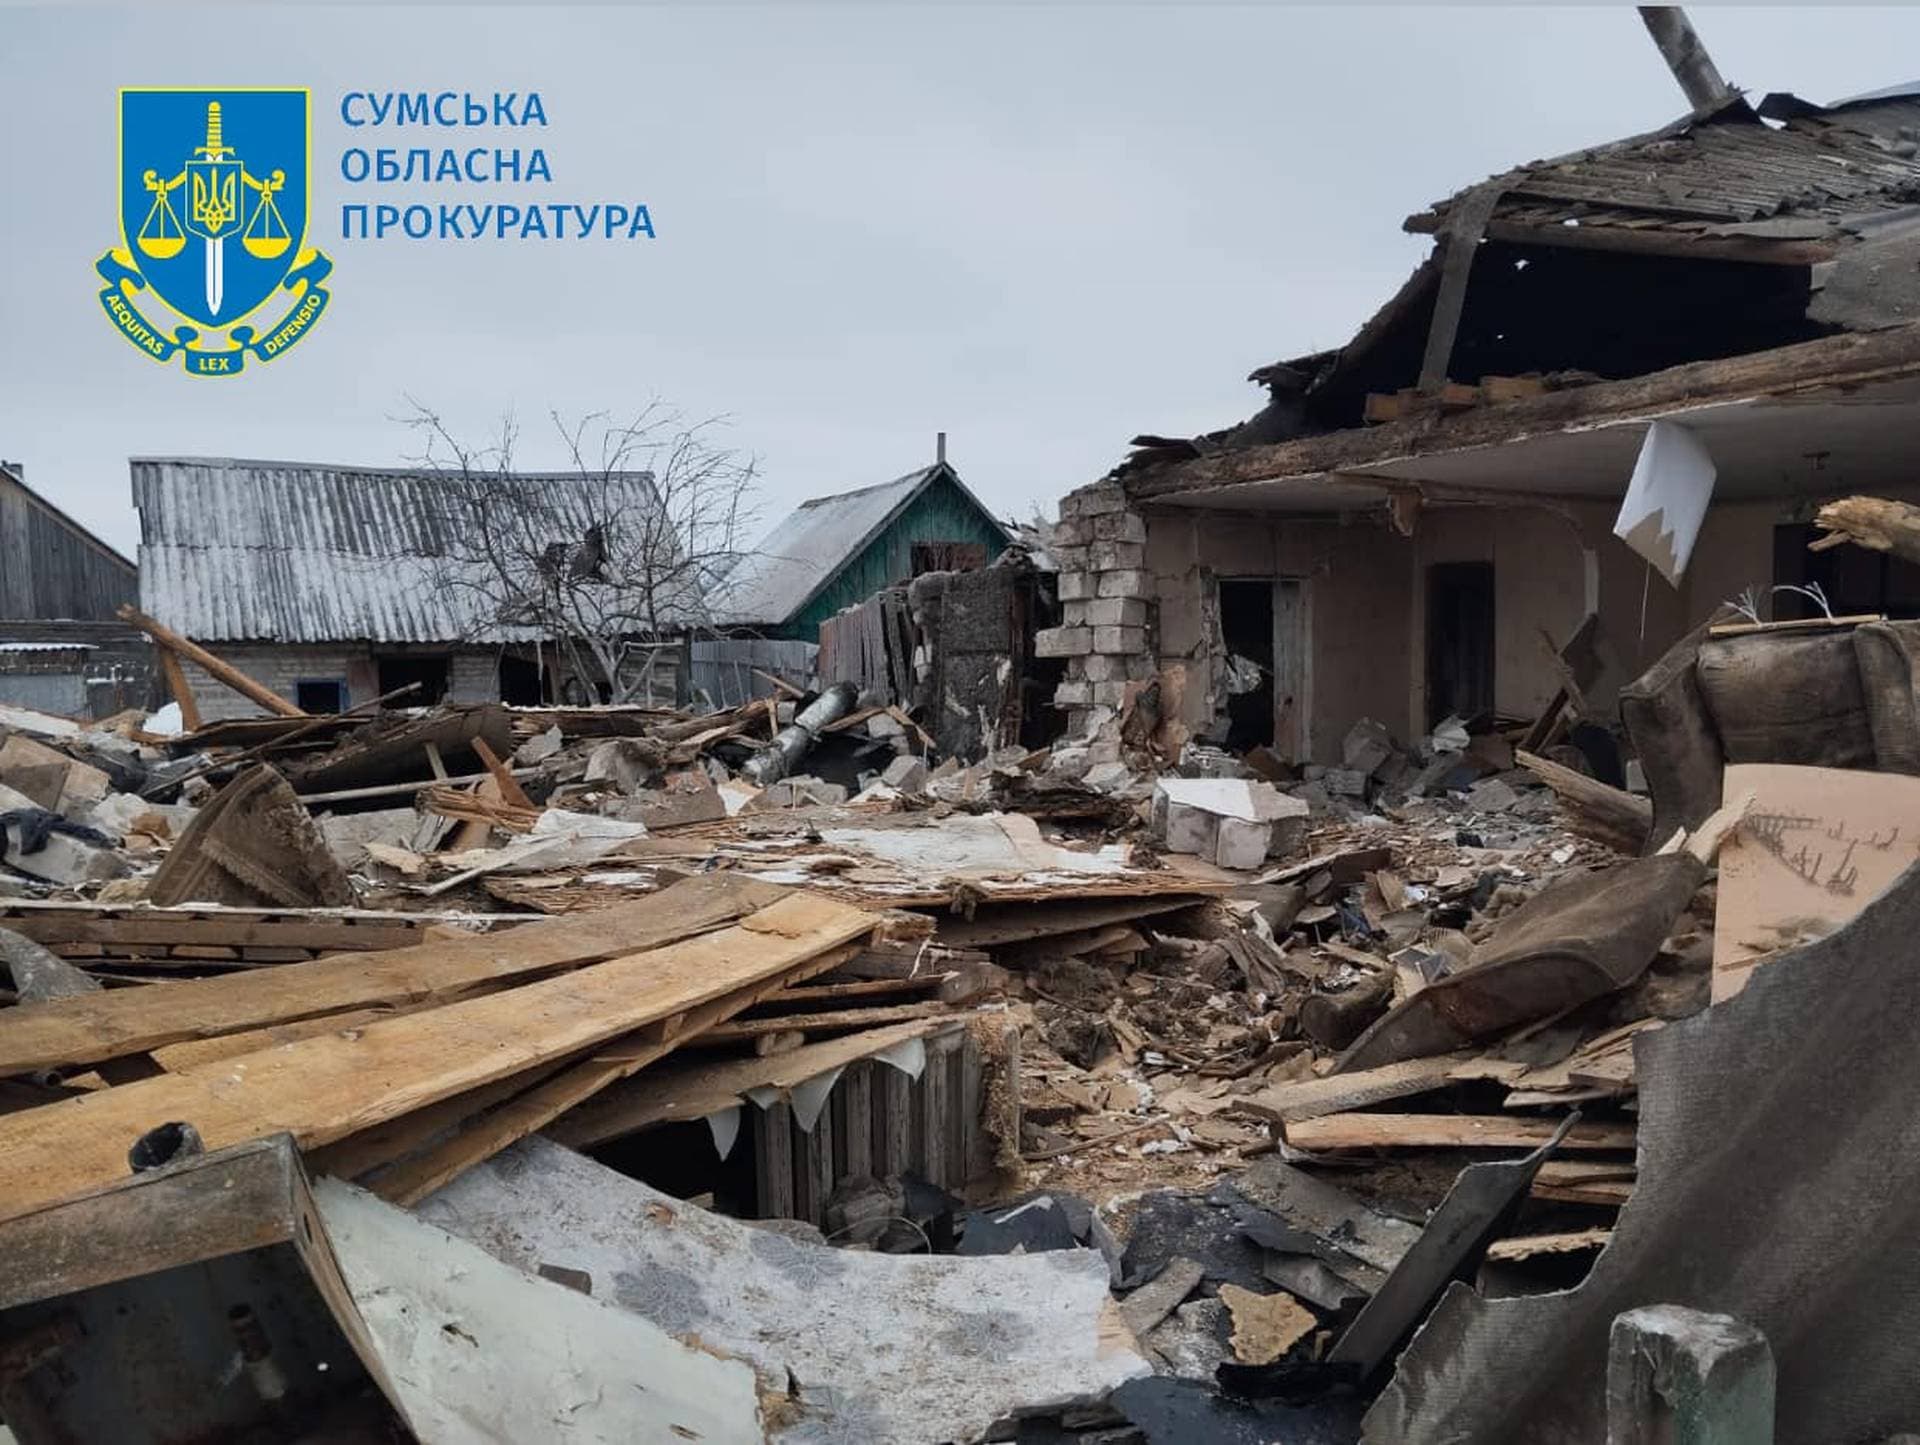 Russian shells destroyed at least five private houses in the village of Seredyna-Buda